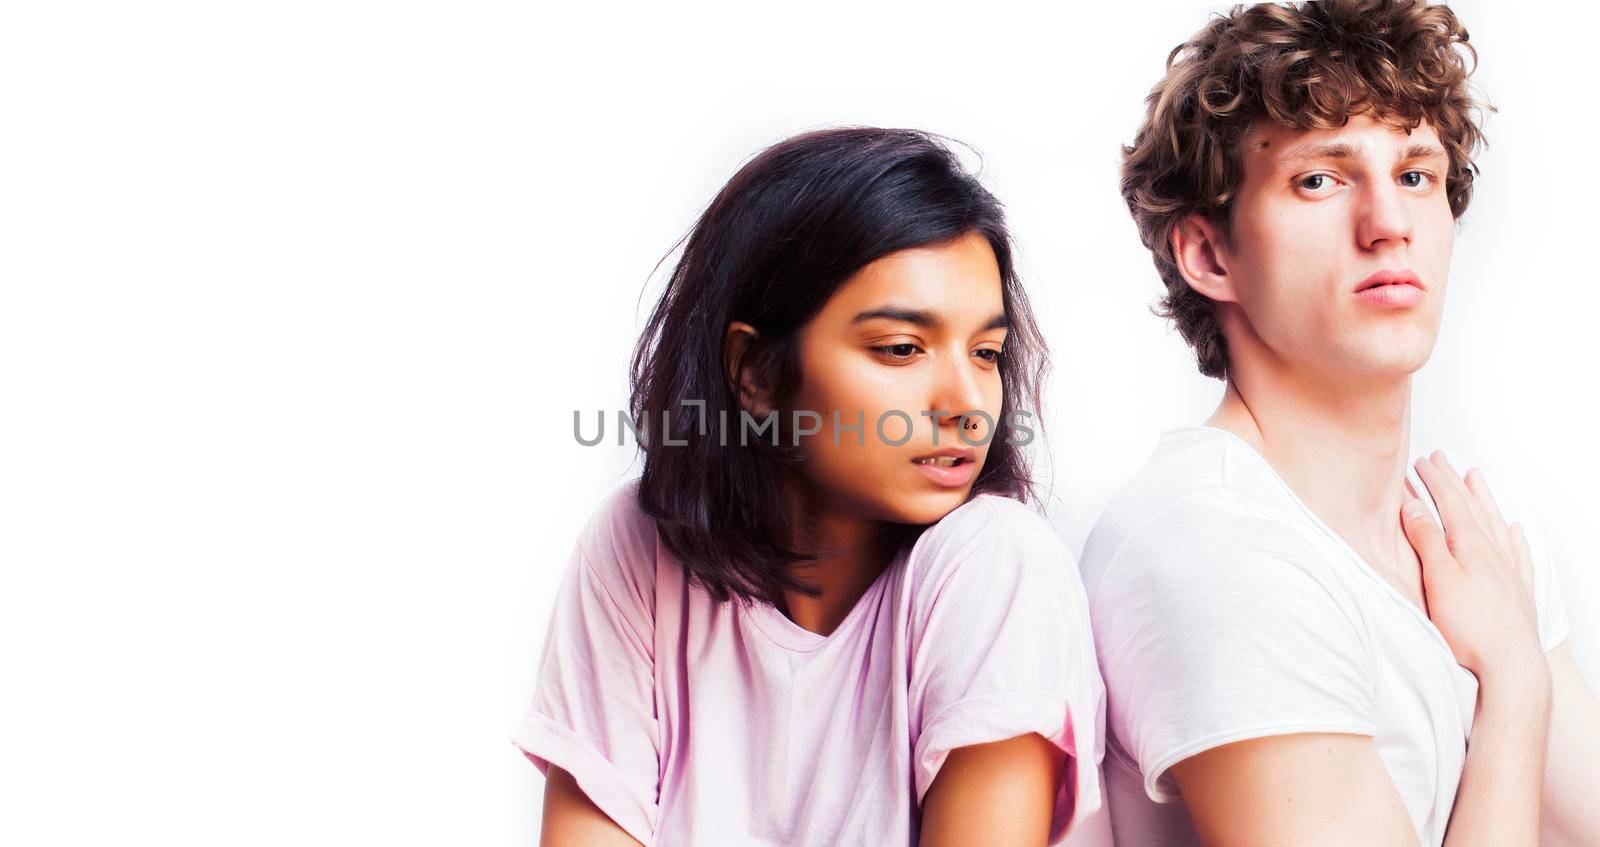 best friends teenage girl and boy together having fun, posing emotional on white background, couple happy smiling, lifestyle people concept, blond and brunette multi nations close up